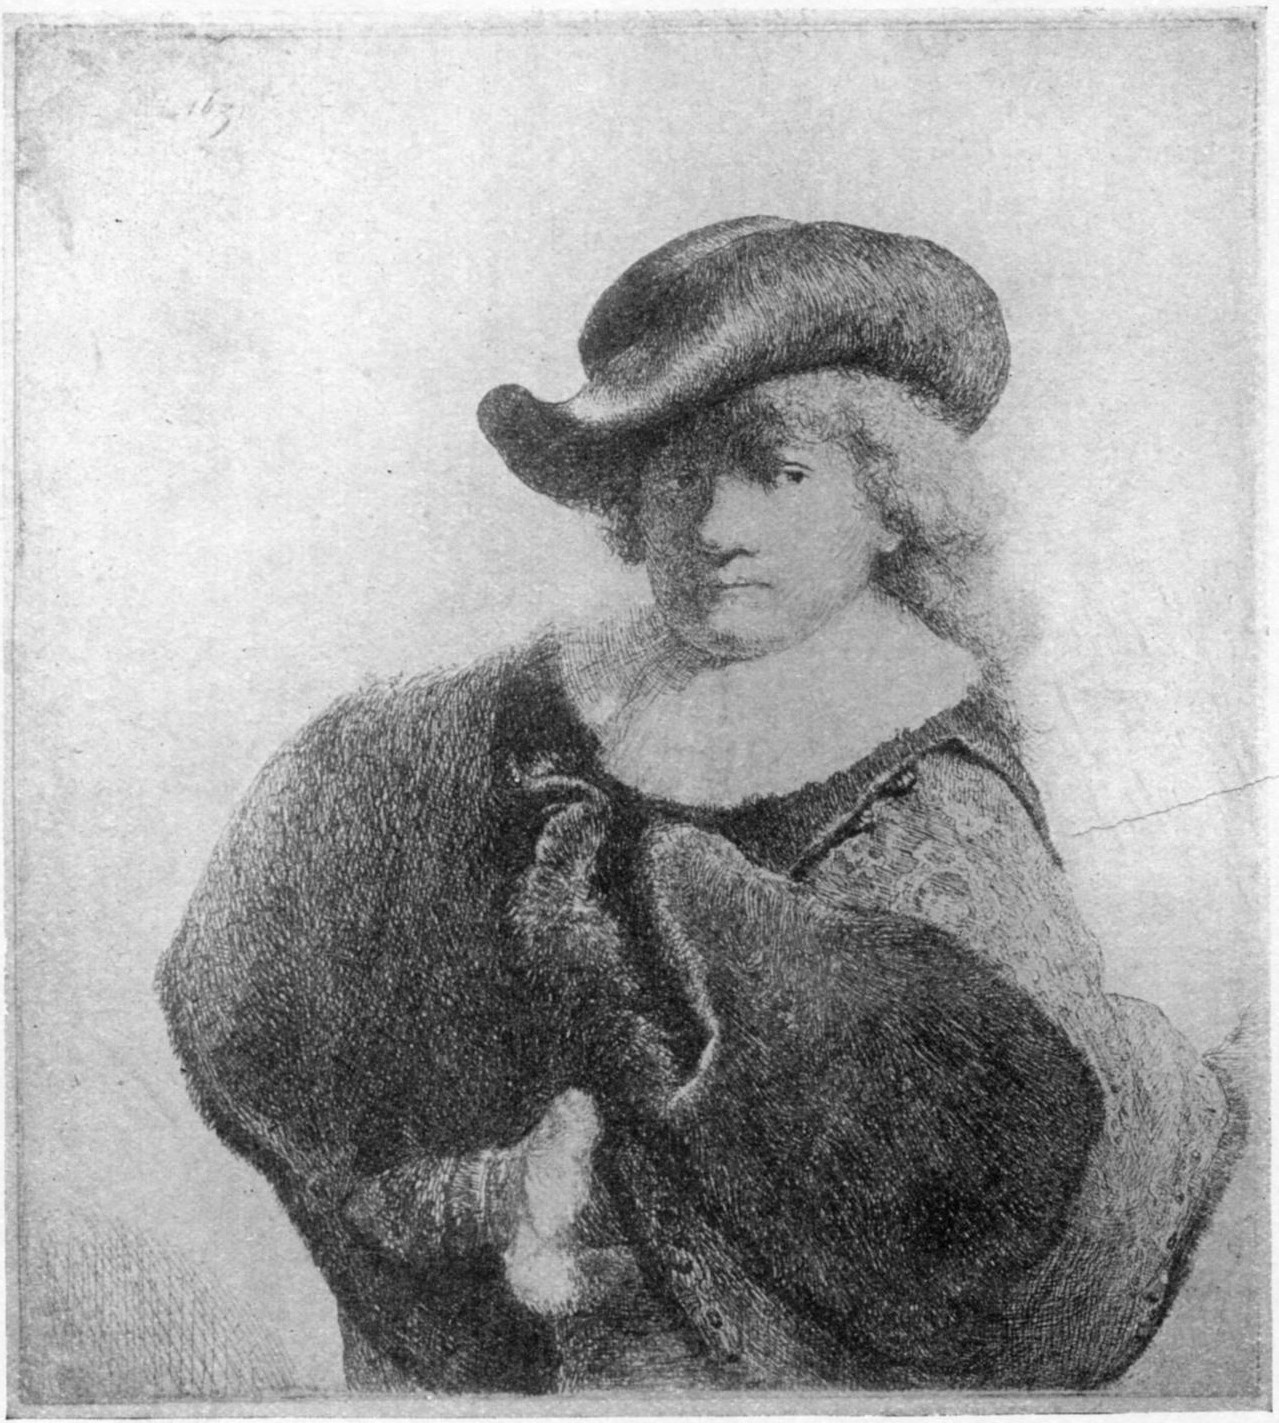 54, VI. REMBRANDT WEARING A SOFT HAT, COCKED. 1631. B. 7. Later state, the body added.